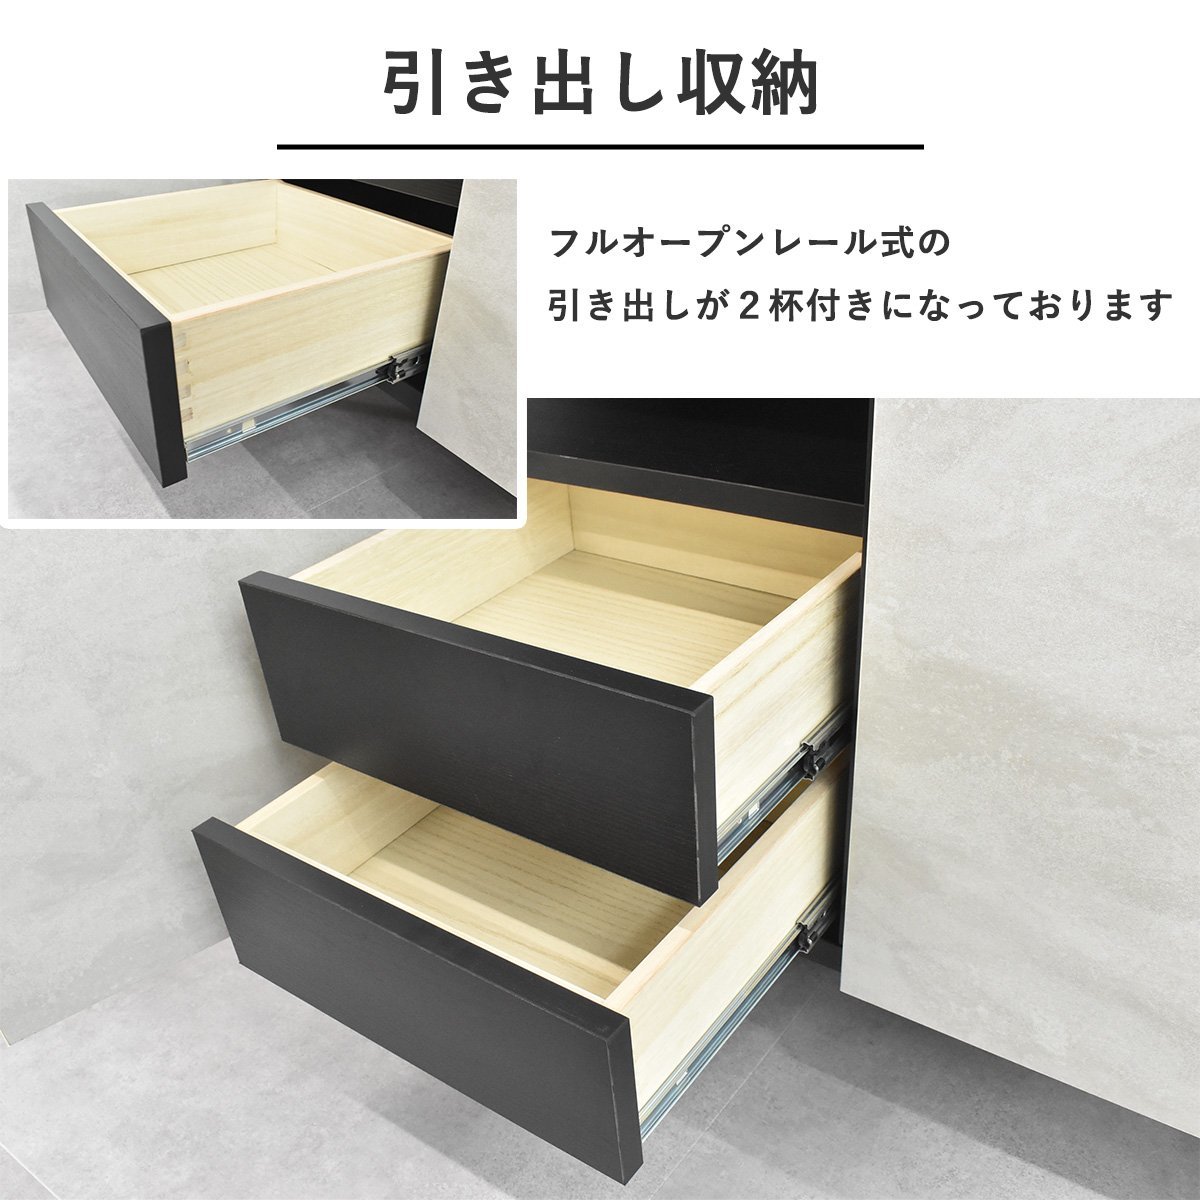 [ limitation free shipping ] high capacity storage 120cm width sideboard storage chest outlet furniture [ new goods unused exhibition goods ]KEN